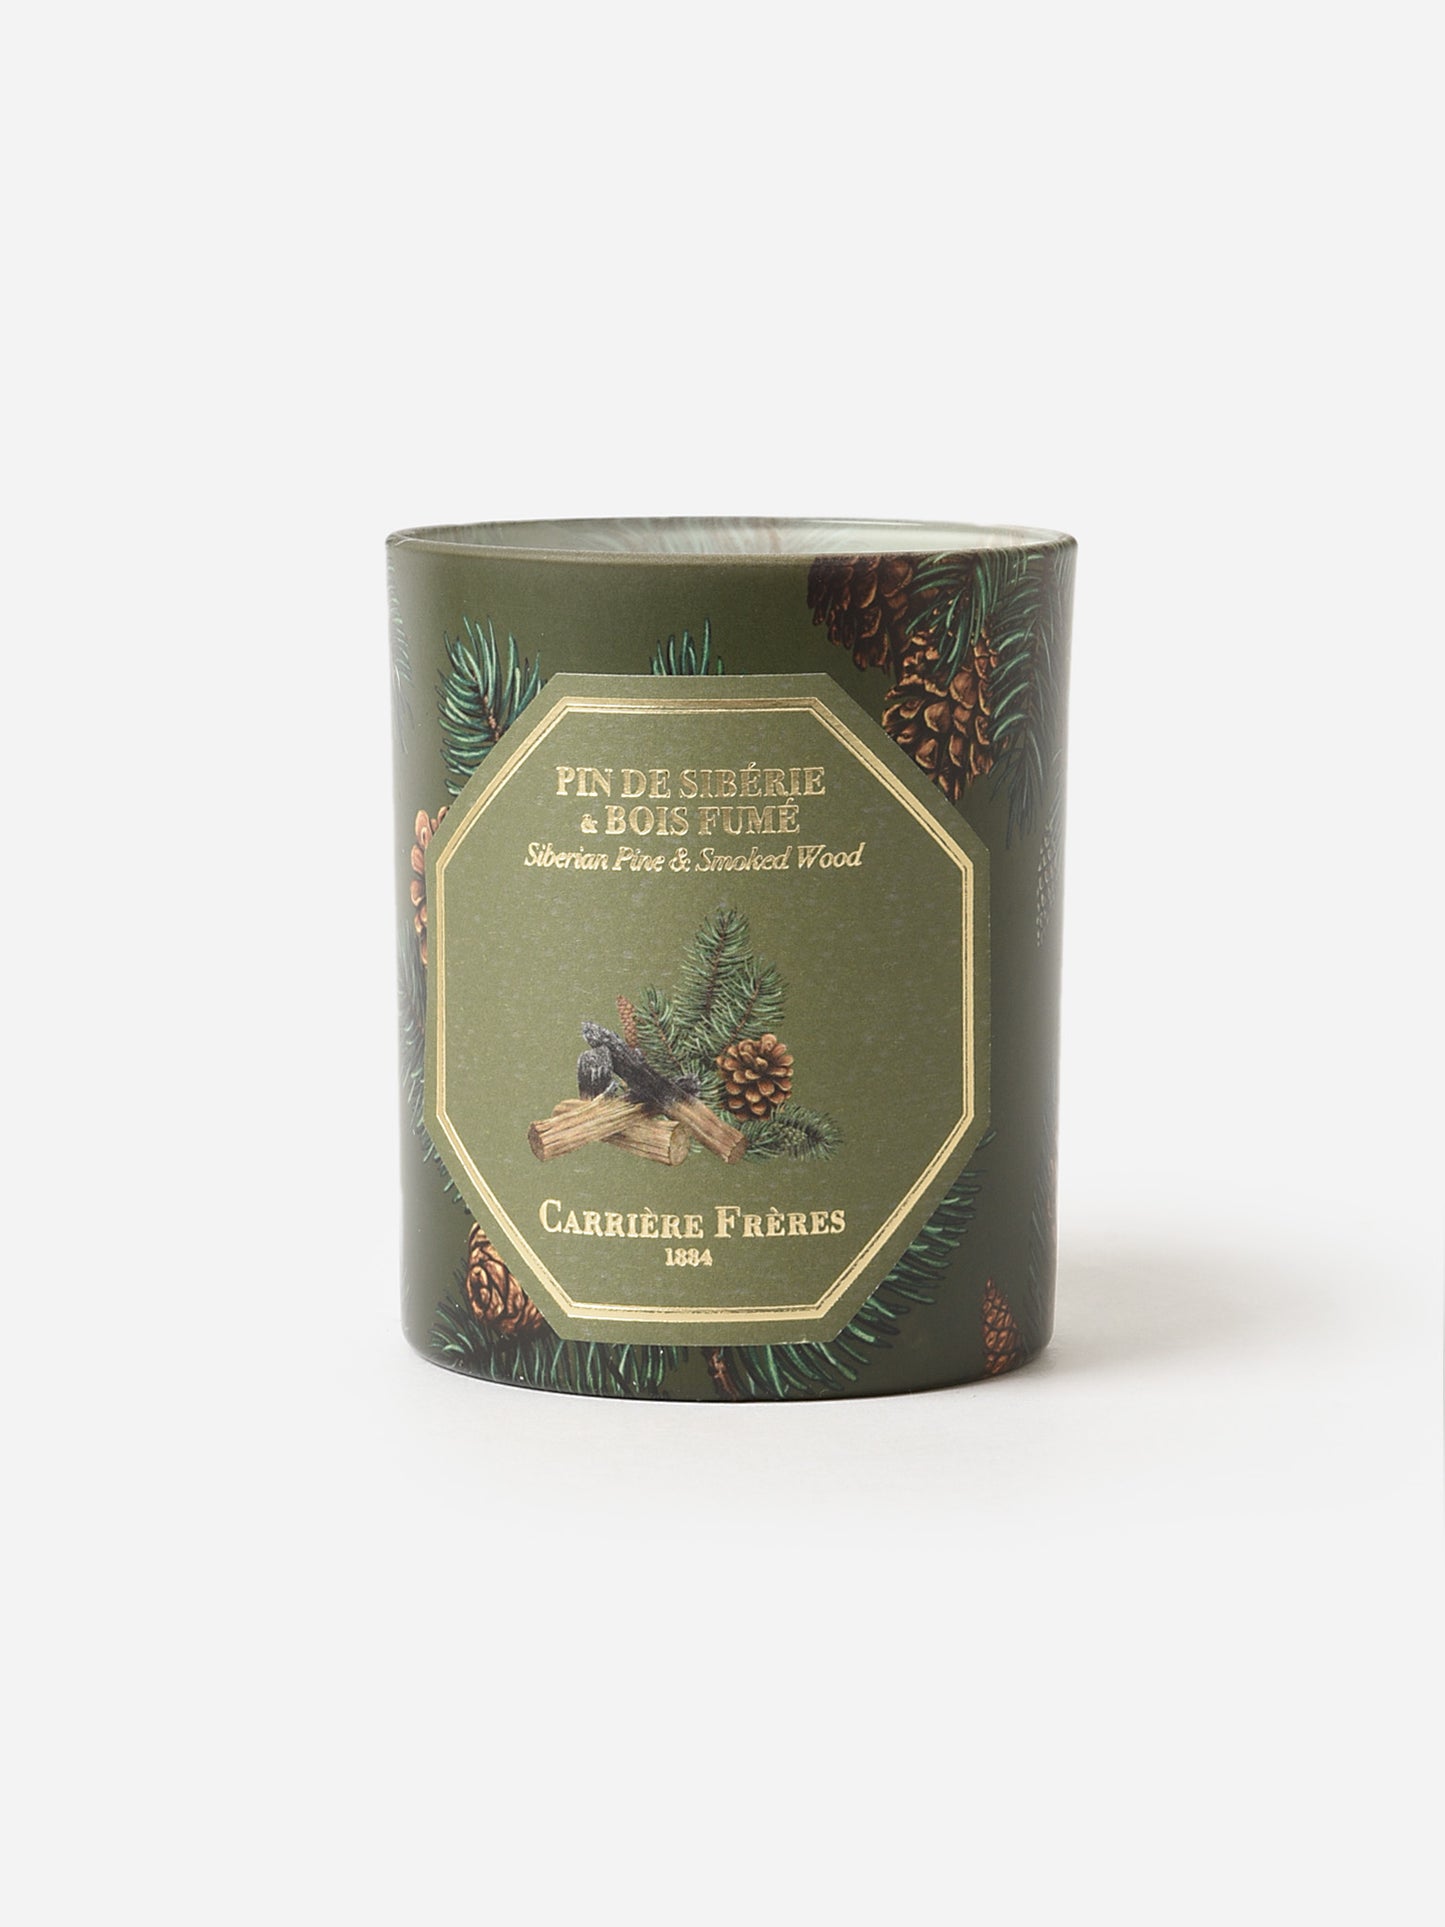 Carriere Freres Siberian Pine + Smoked Wood Candle